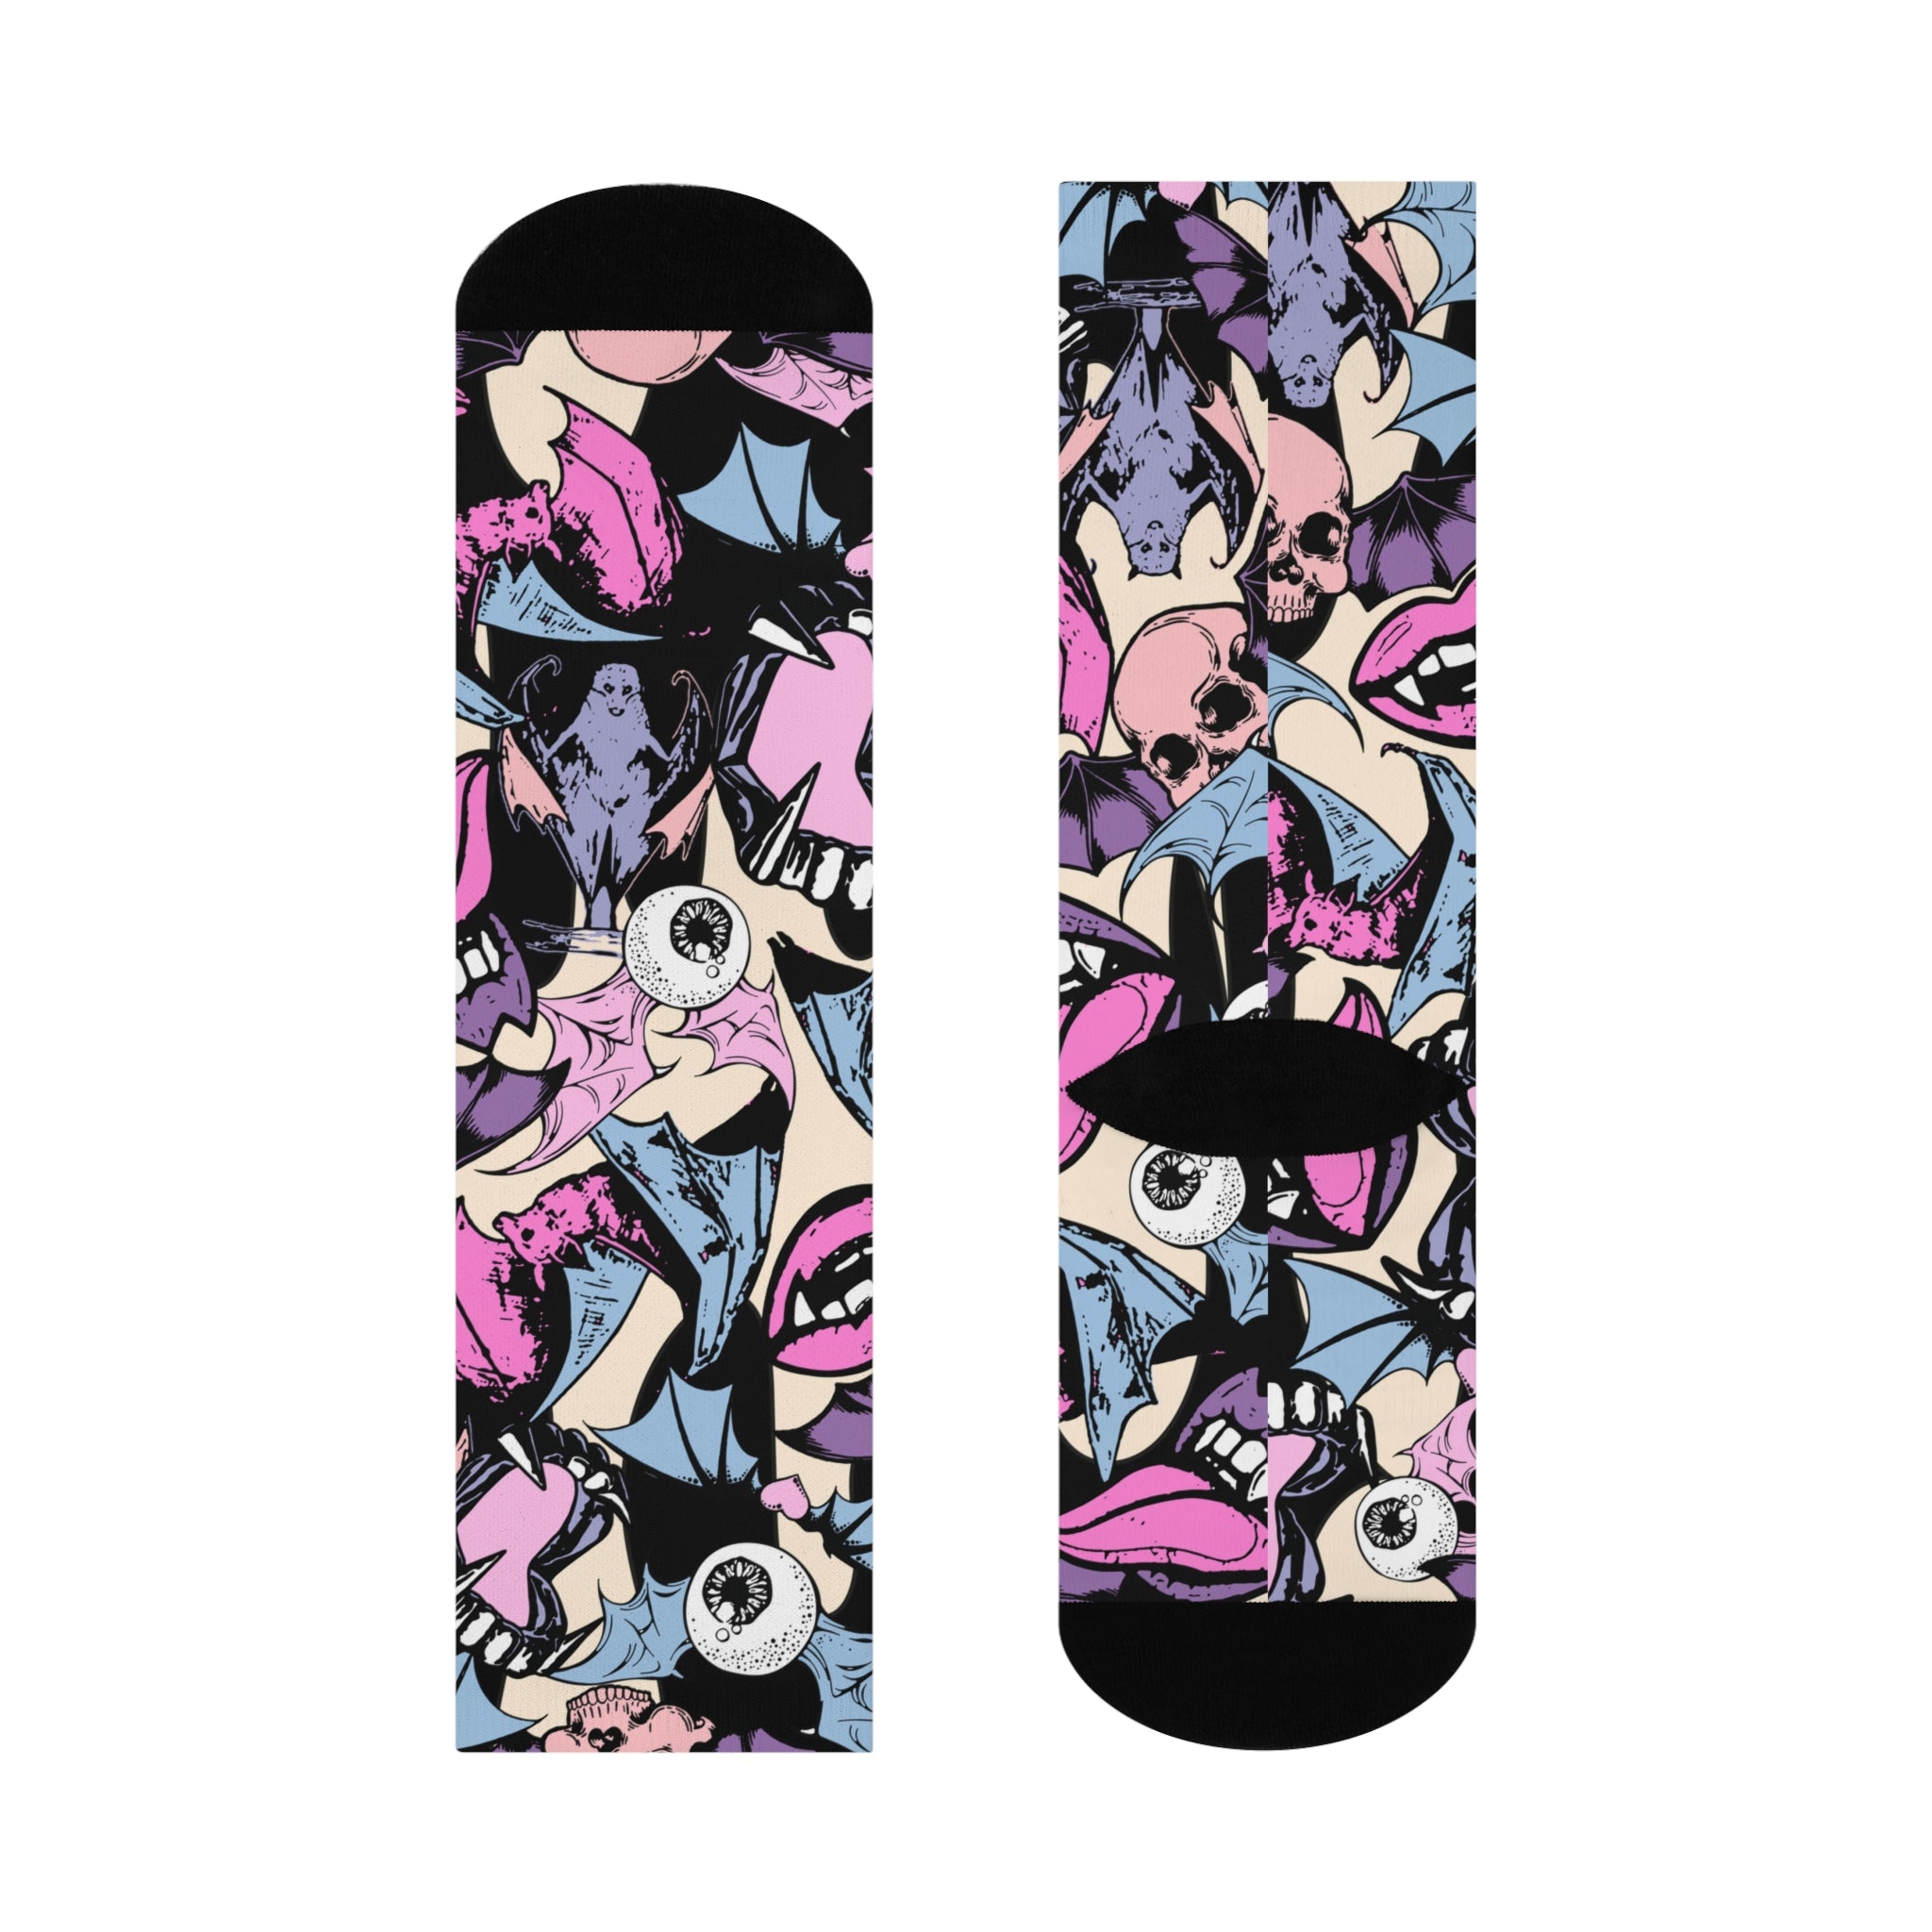 Freaky-fabulous socks sprawled on pink. Bats, skulls, and eyeballs galore. Punk rock meets Dracula's yard sale. Slip these on and let your feet do the screaming.